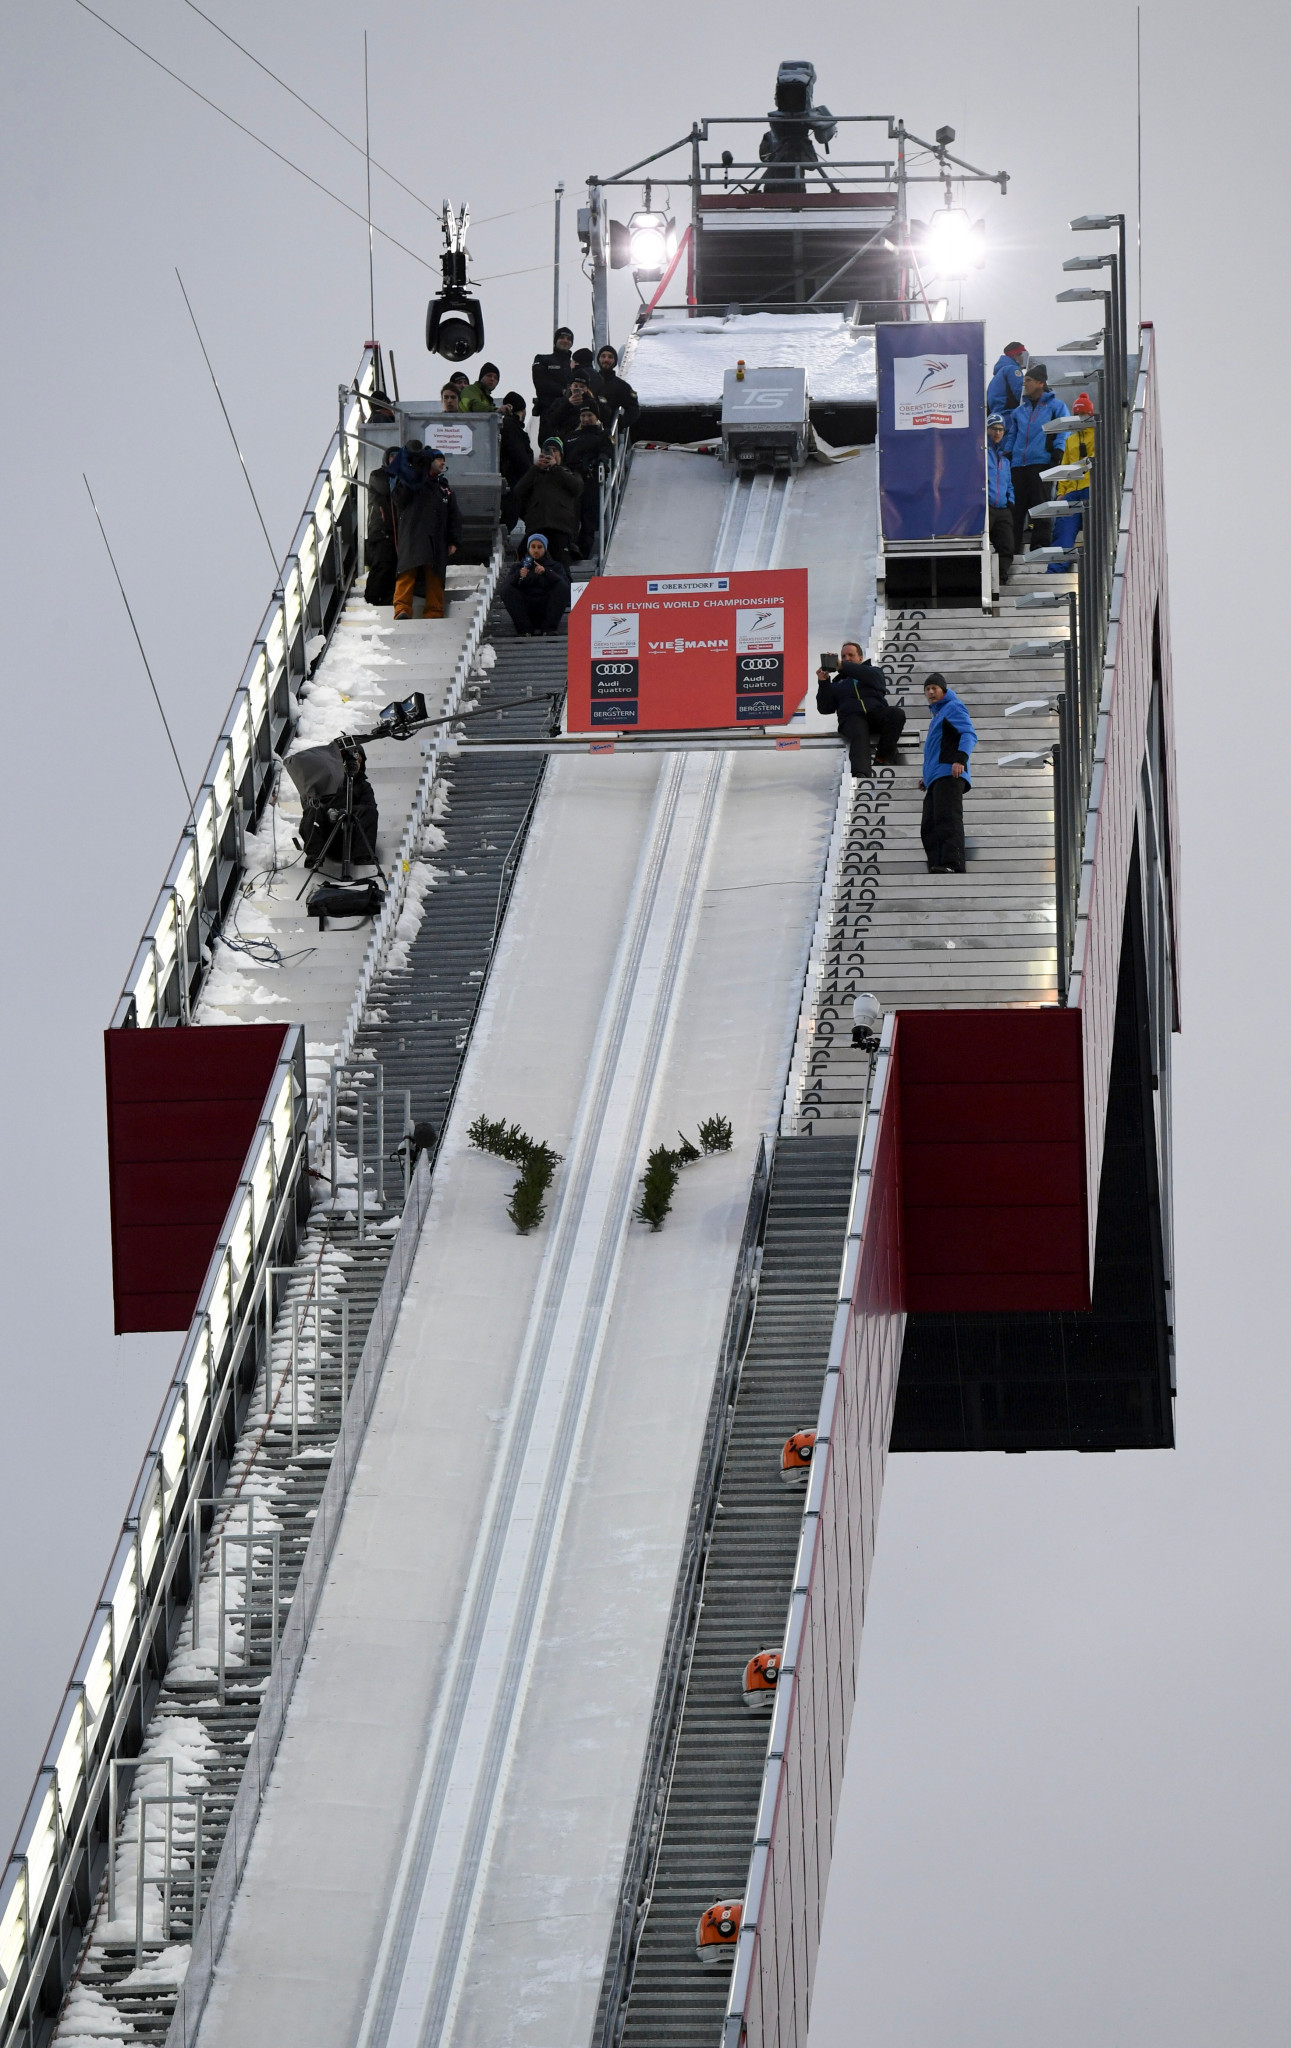 Reconstruction work has finished at the ski jumping hills in Oberstdorf ©Getty Images